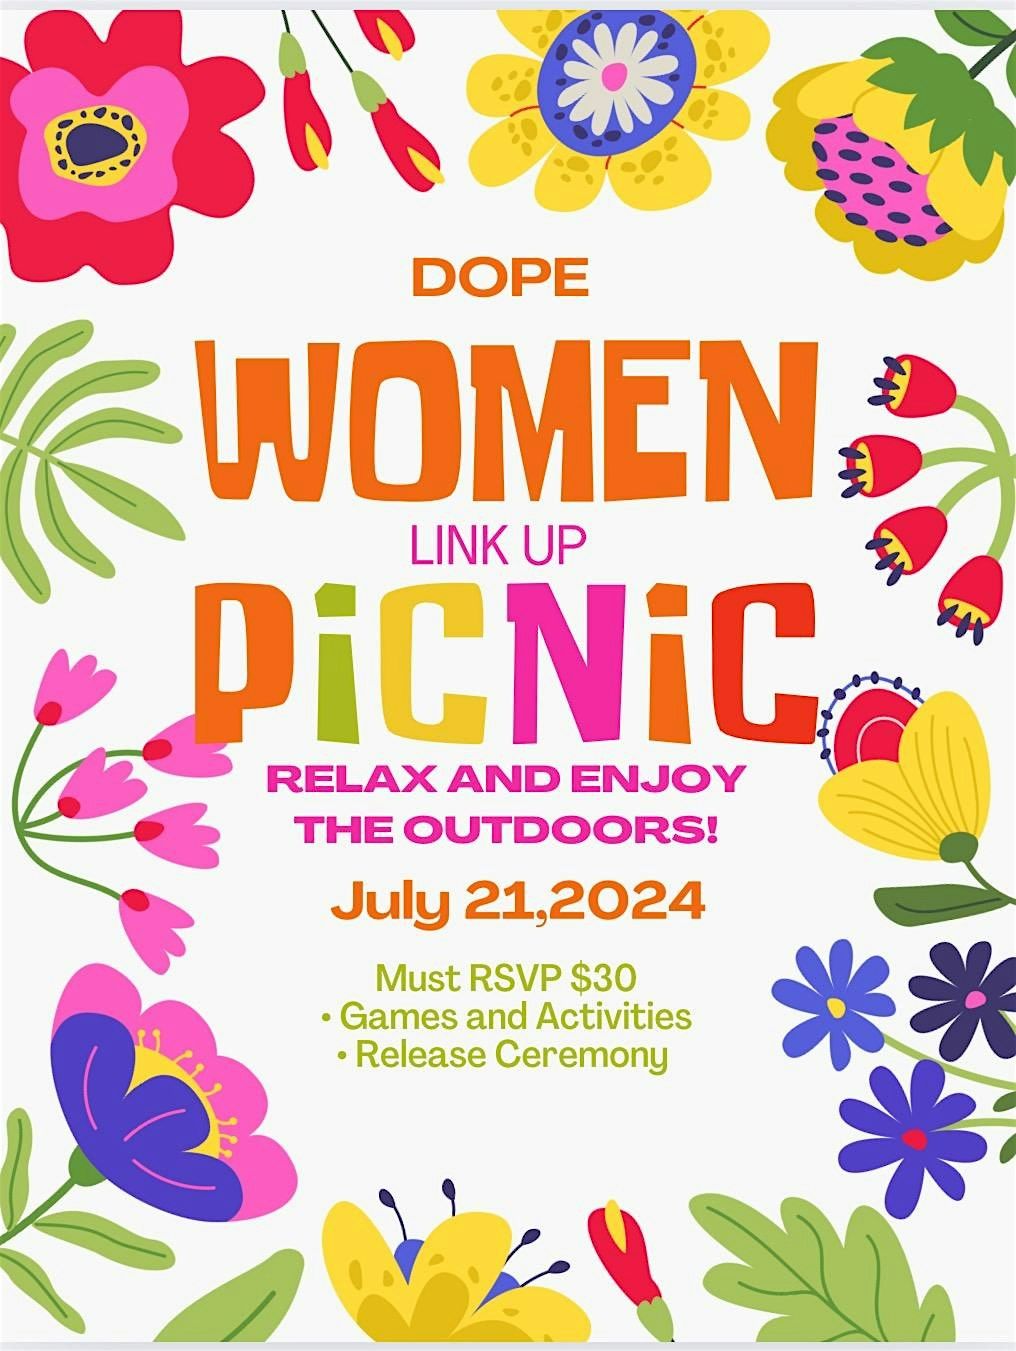 Dope Women Link Up Picnic